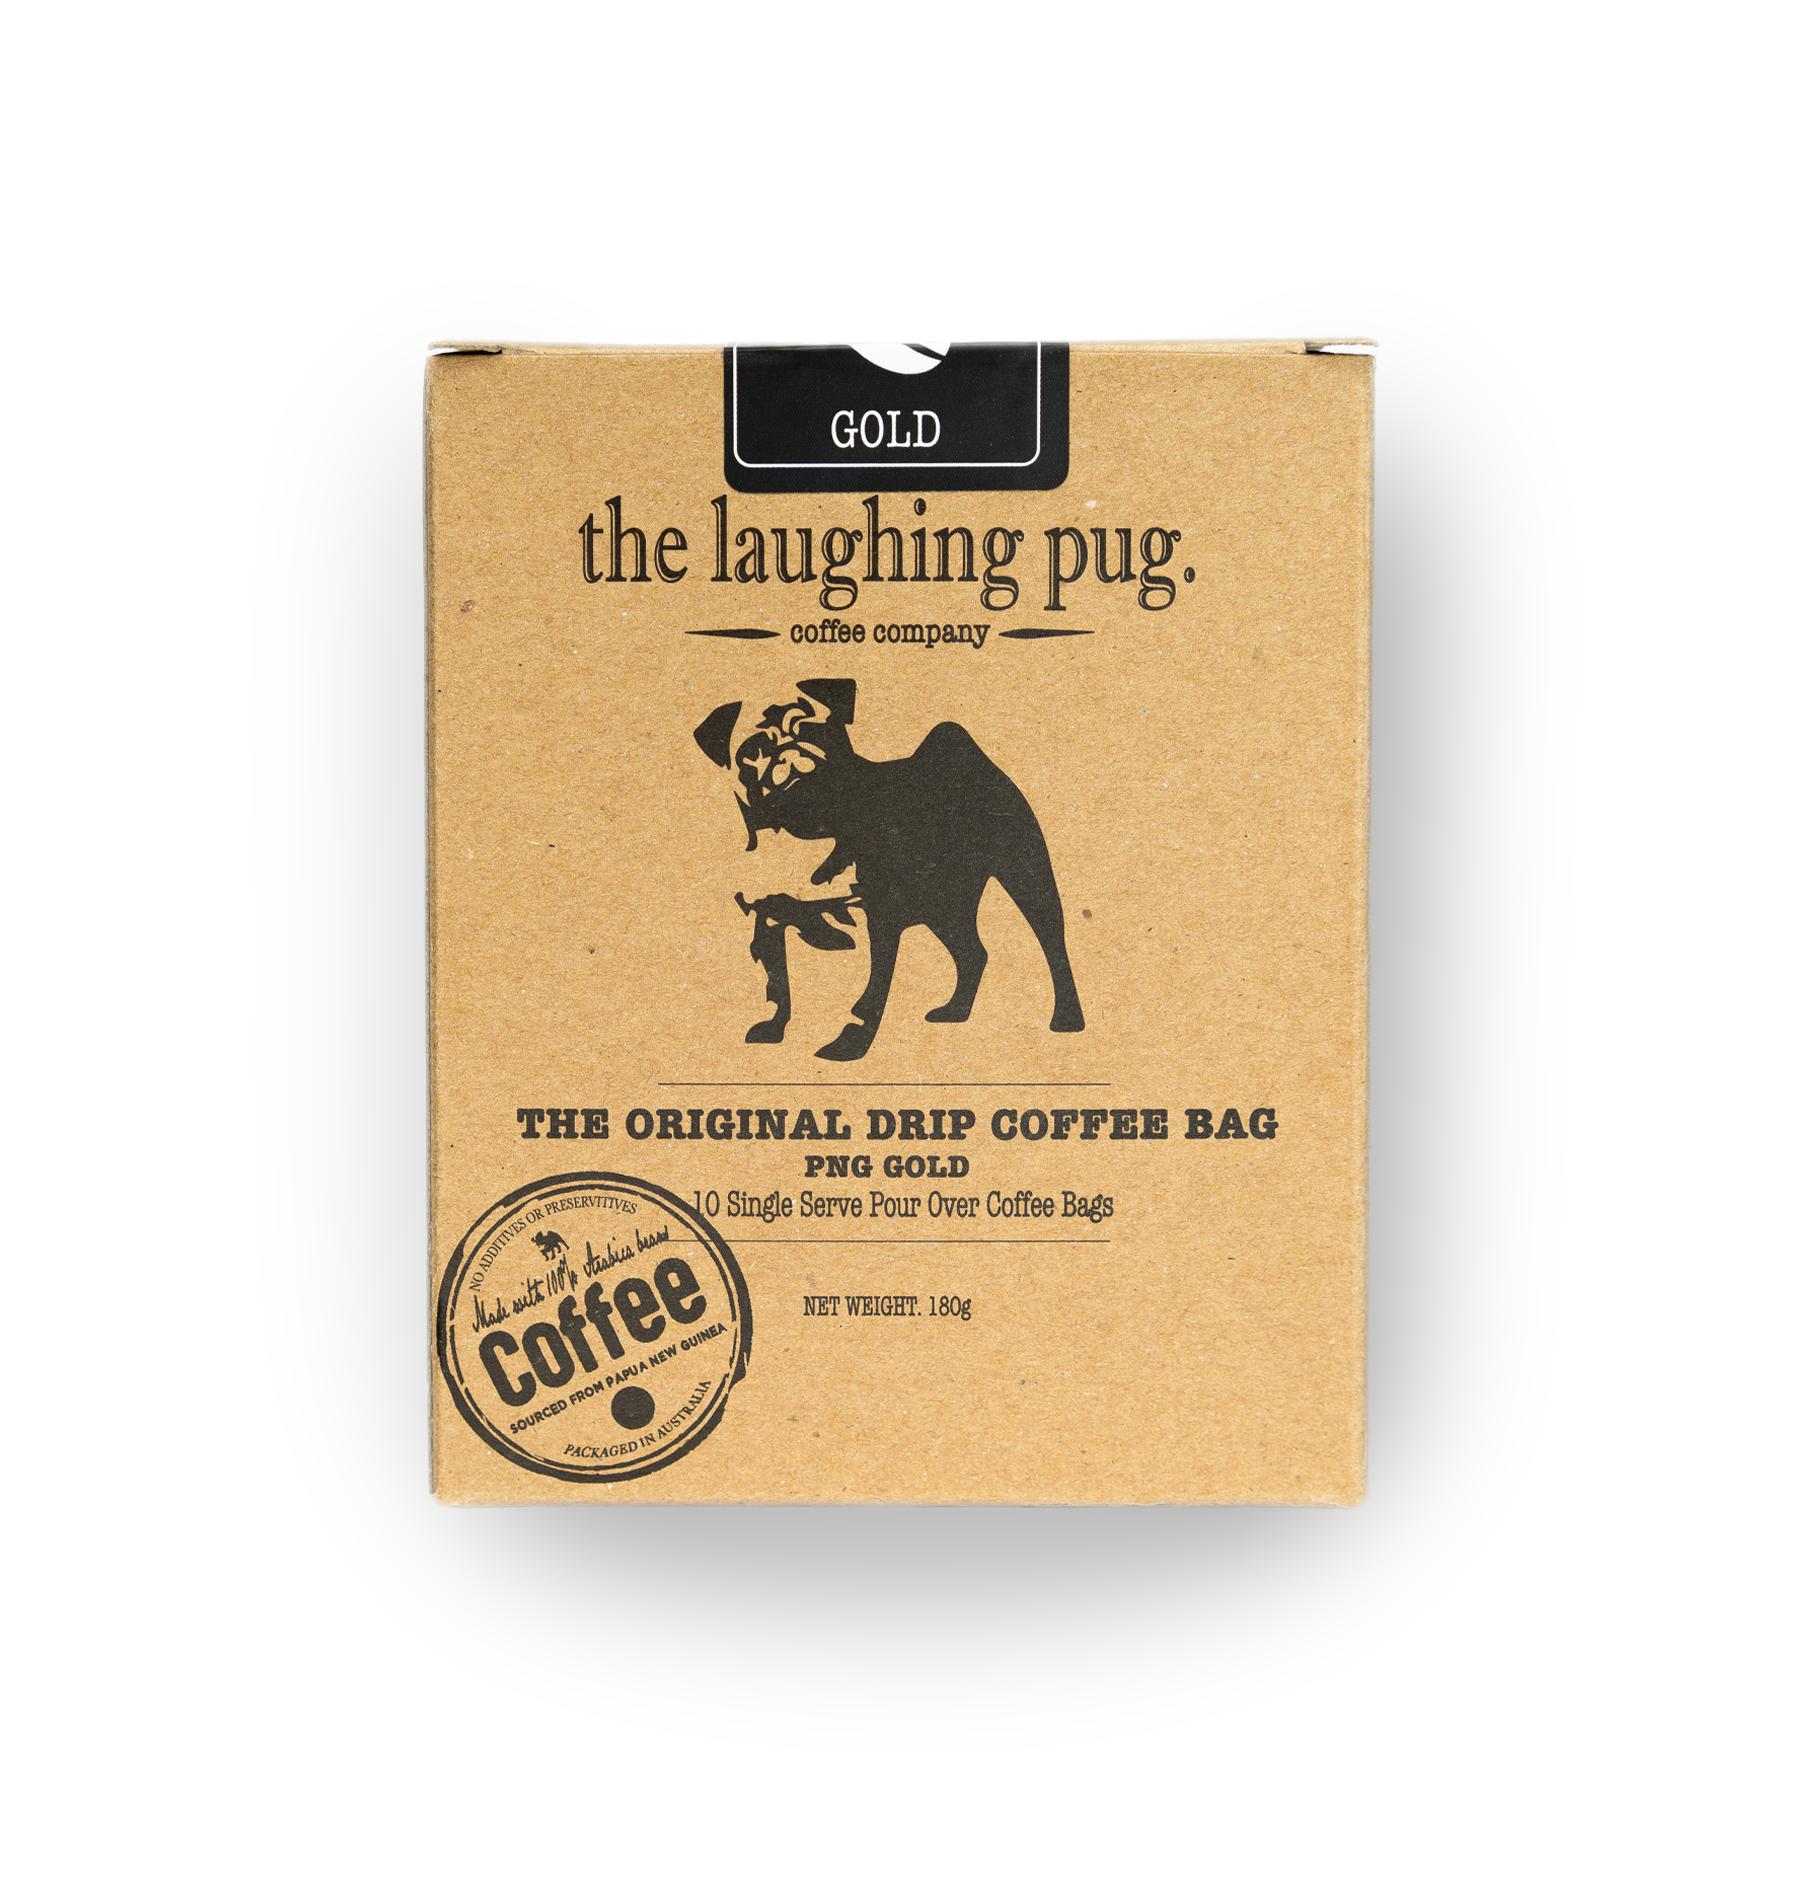 Individually foiled Drip Coffee Bags